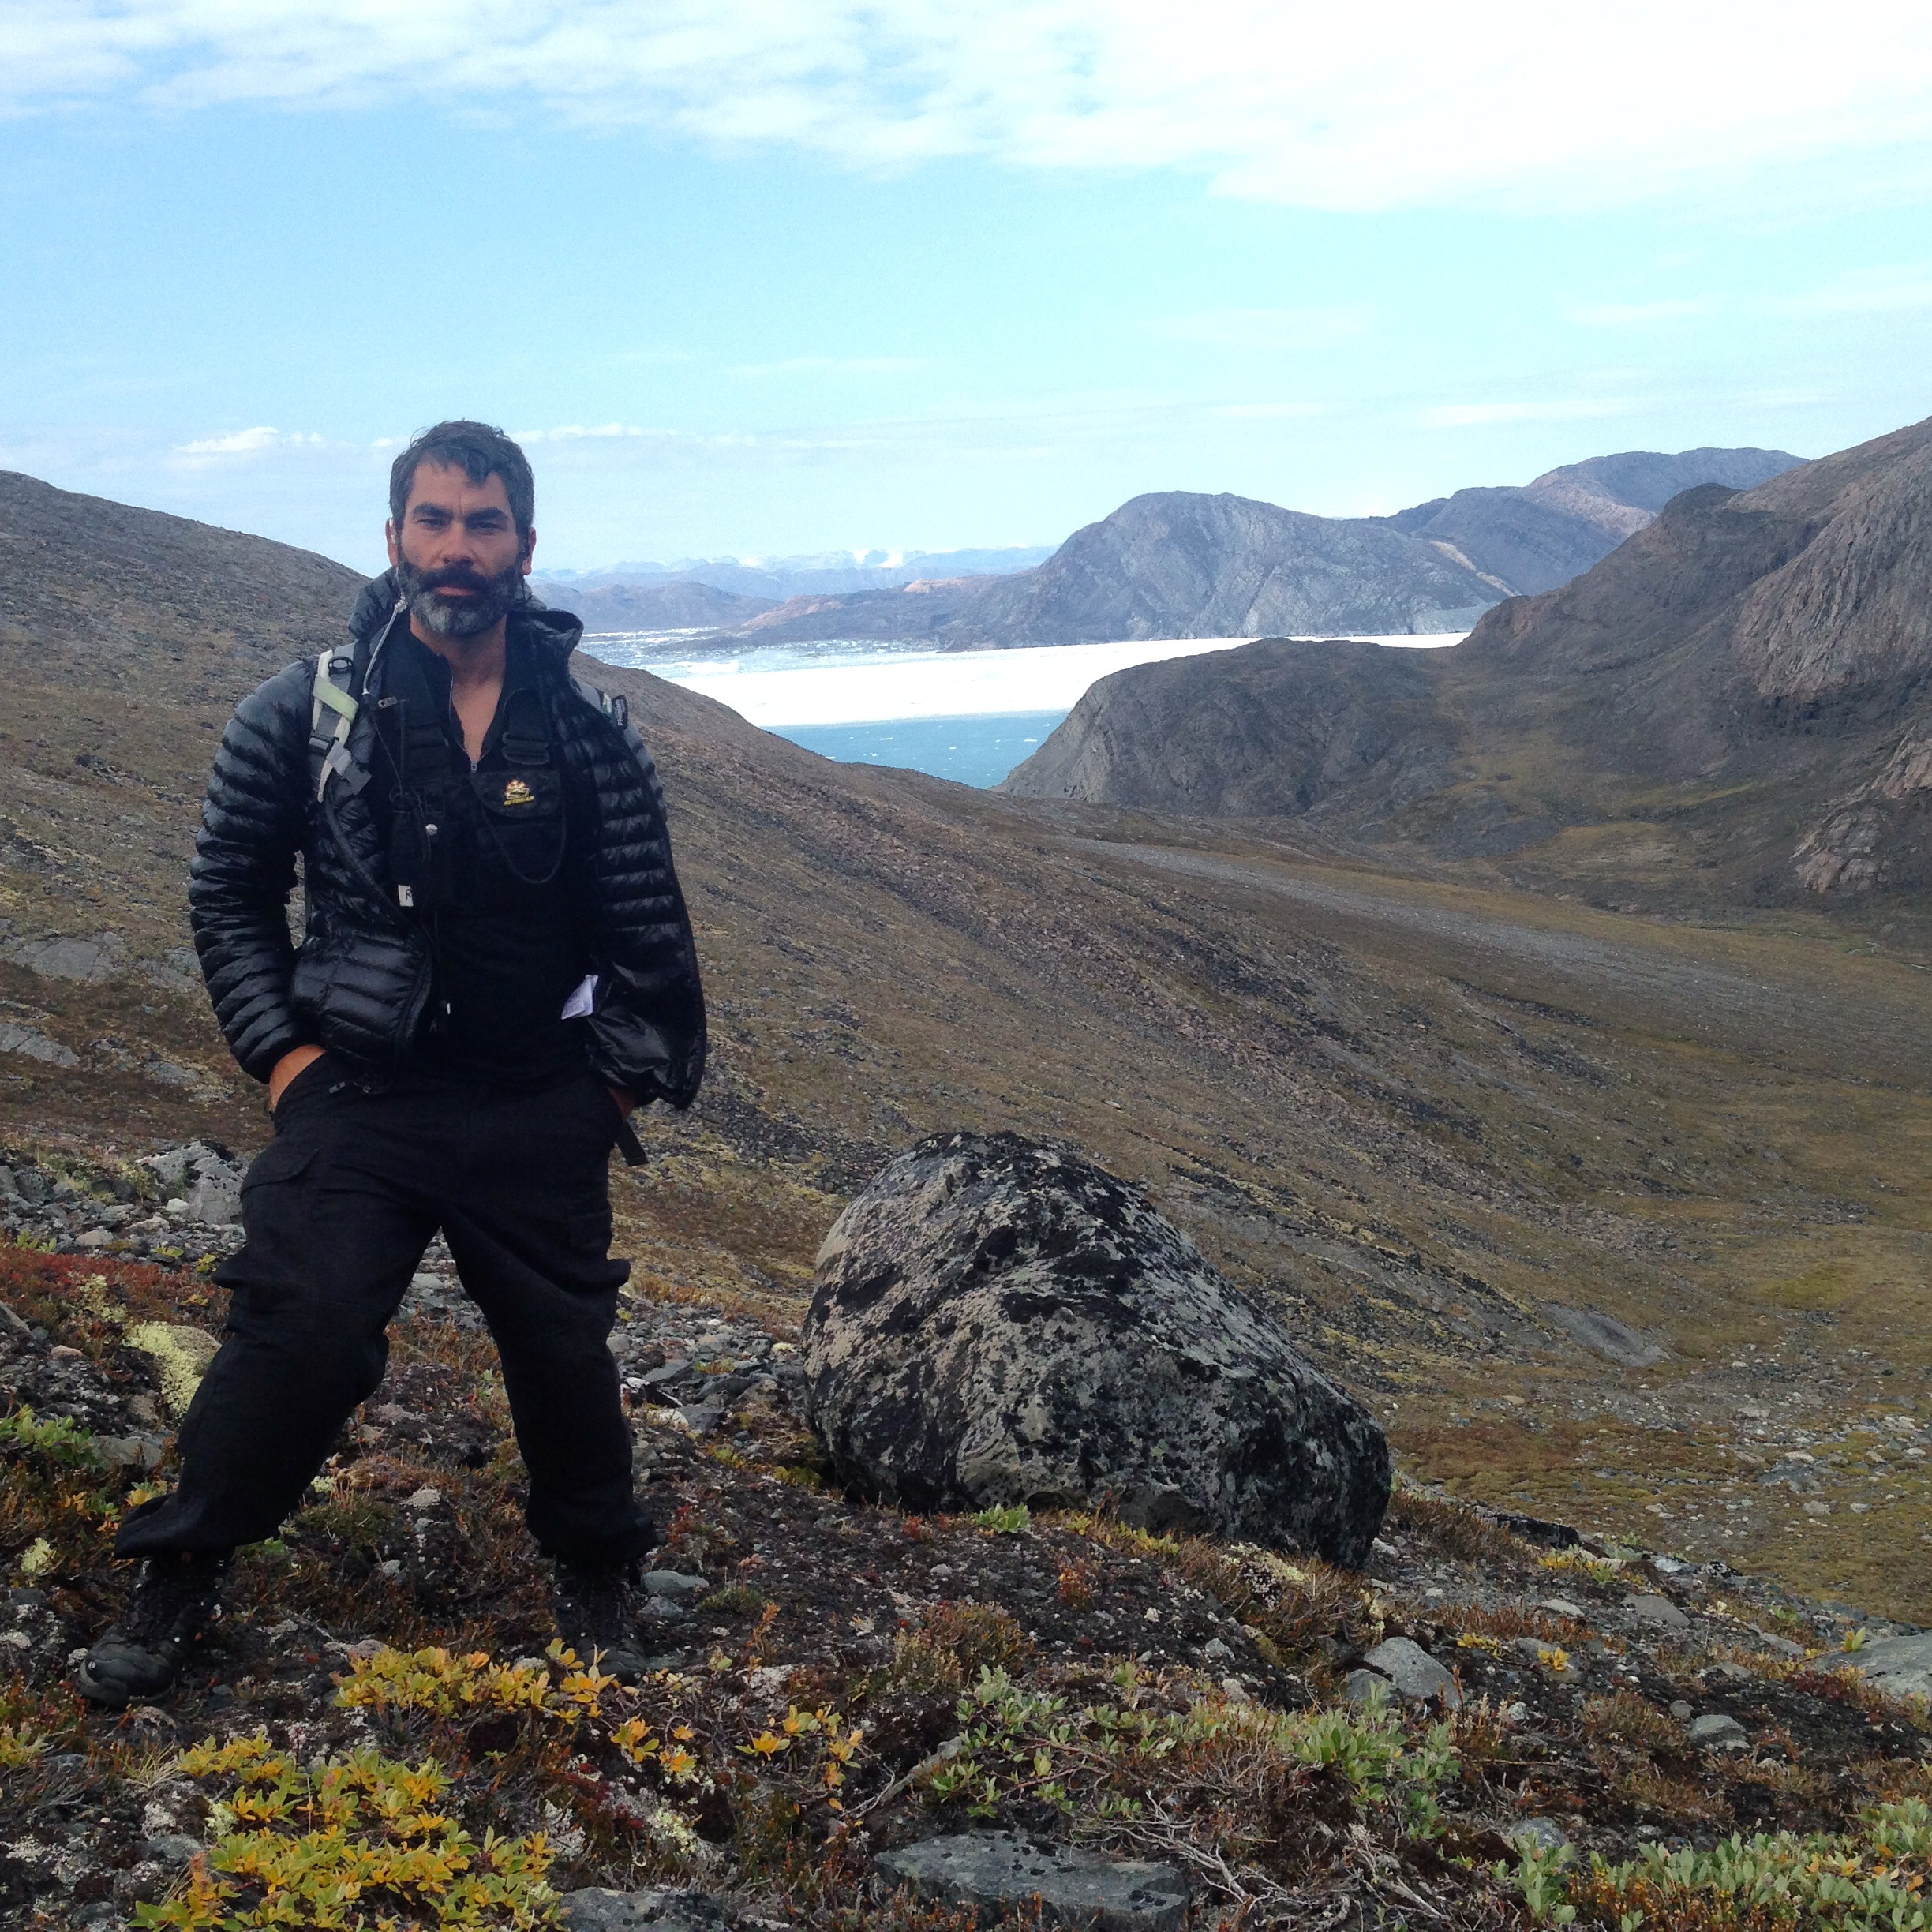 On location in Greenland, Ice Cold Gold Animal Planet